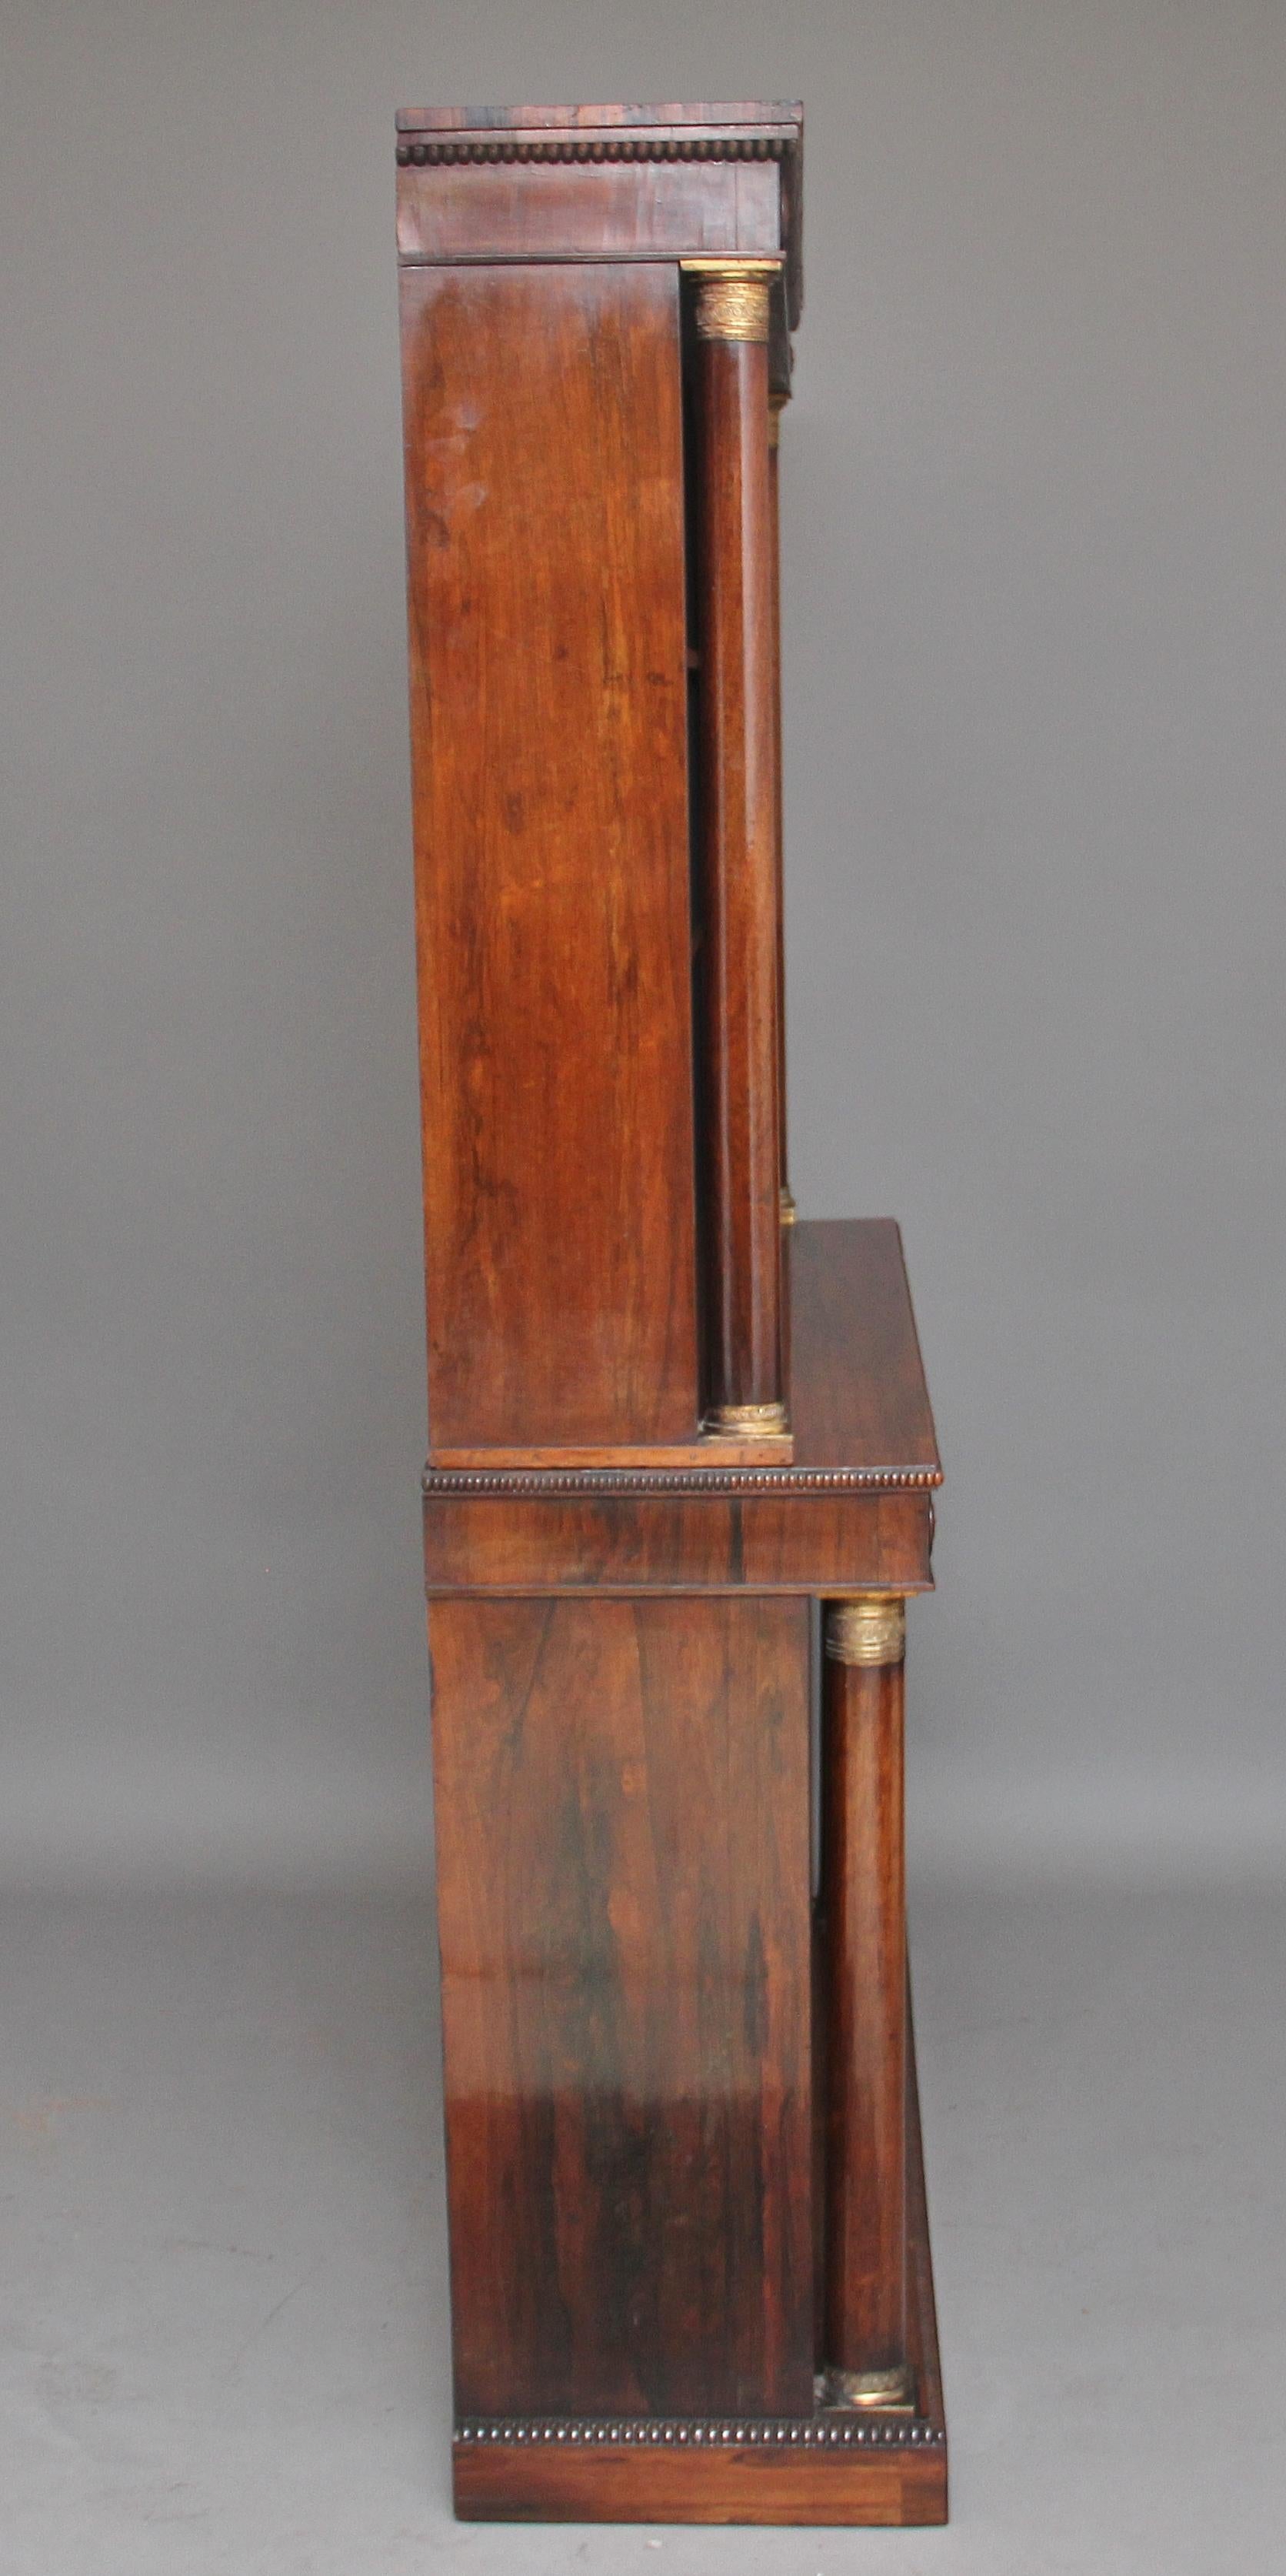 Early 19th Century Rosewood and Brass Inlaid Bookcase im Zustand „Gut“ in Martlesham, GB